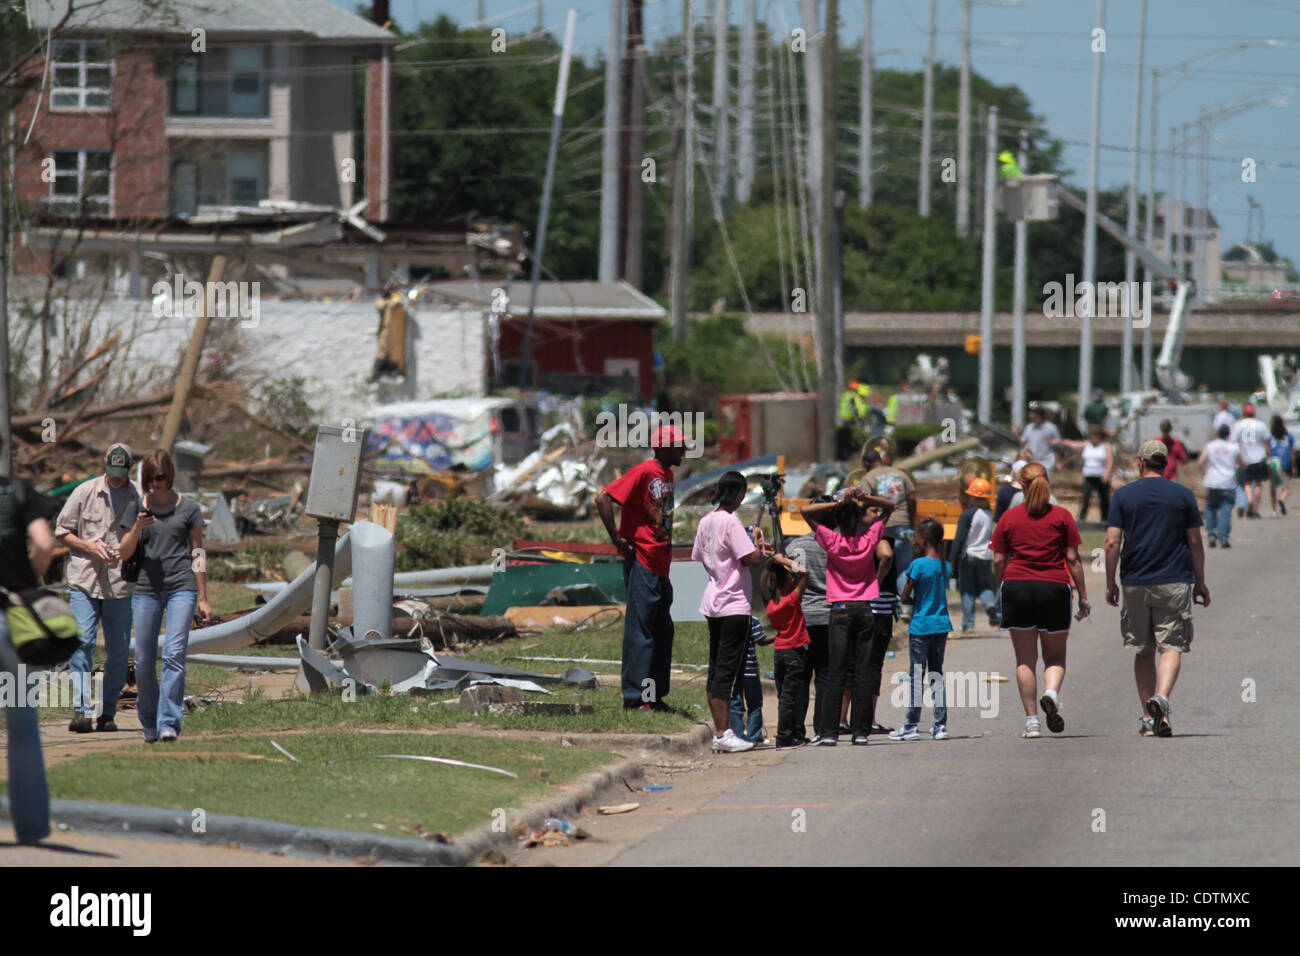 Apr 29, 2011 - Tuscaloosa , Alabama, USA - People walk through the streets of Tuscaloosa, Alabama to see the damage left behind by a string of powerful tornados that hit the area on April 27, 2011 causing massive devastation and killing nearly three hundred in the Southern region of the United State Stock Photo